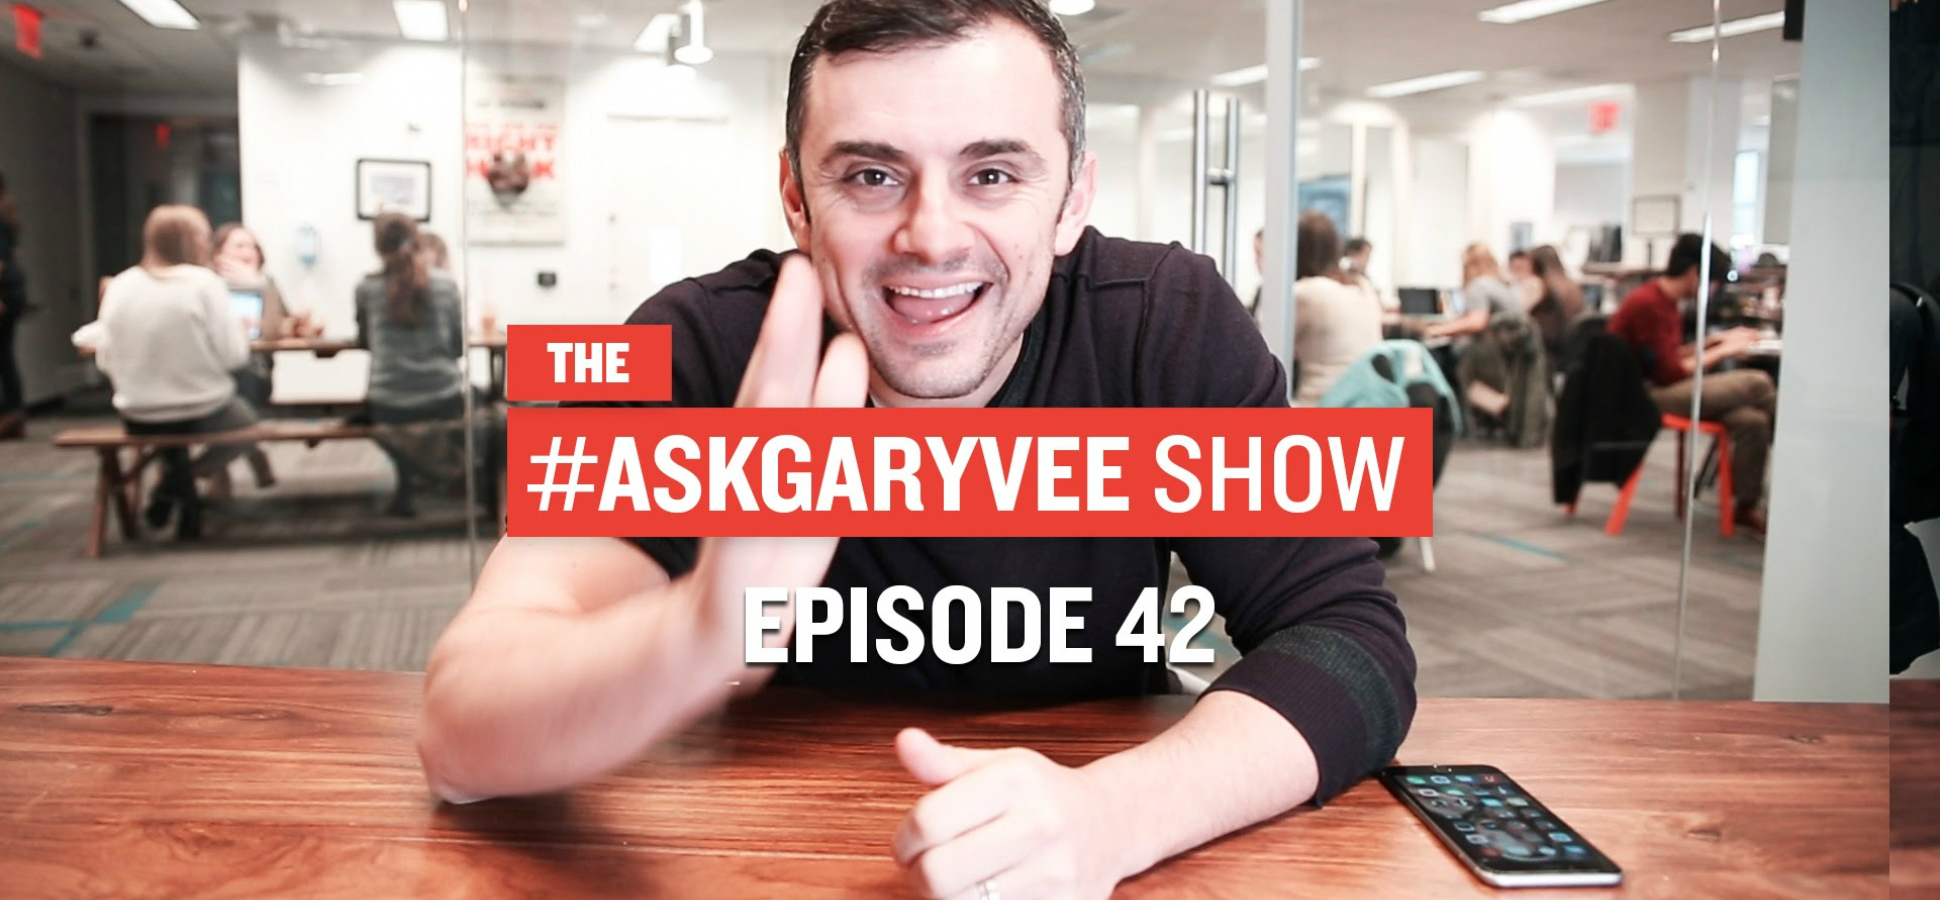 Inside The #AskGaryVee Show Syndication Model: The Power Of Syndication